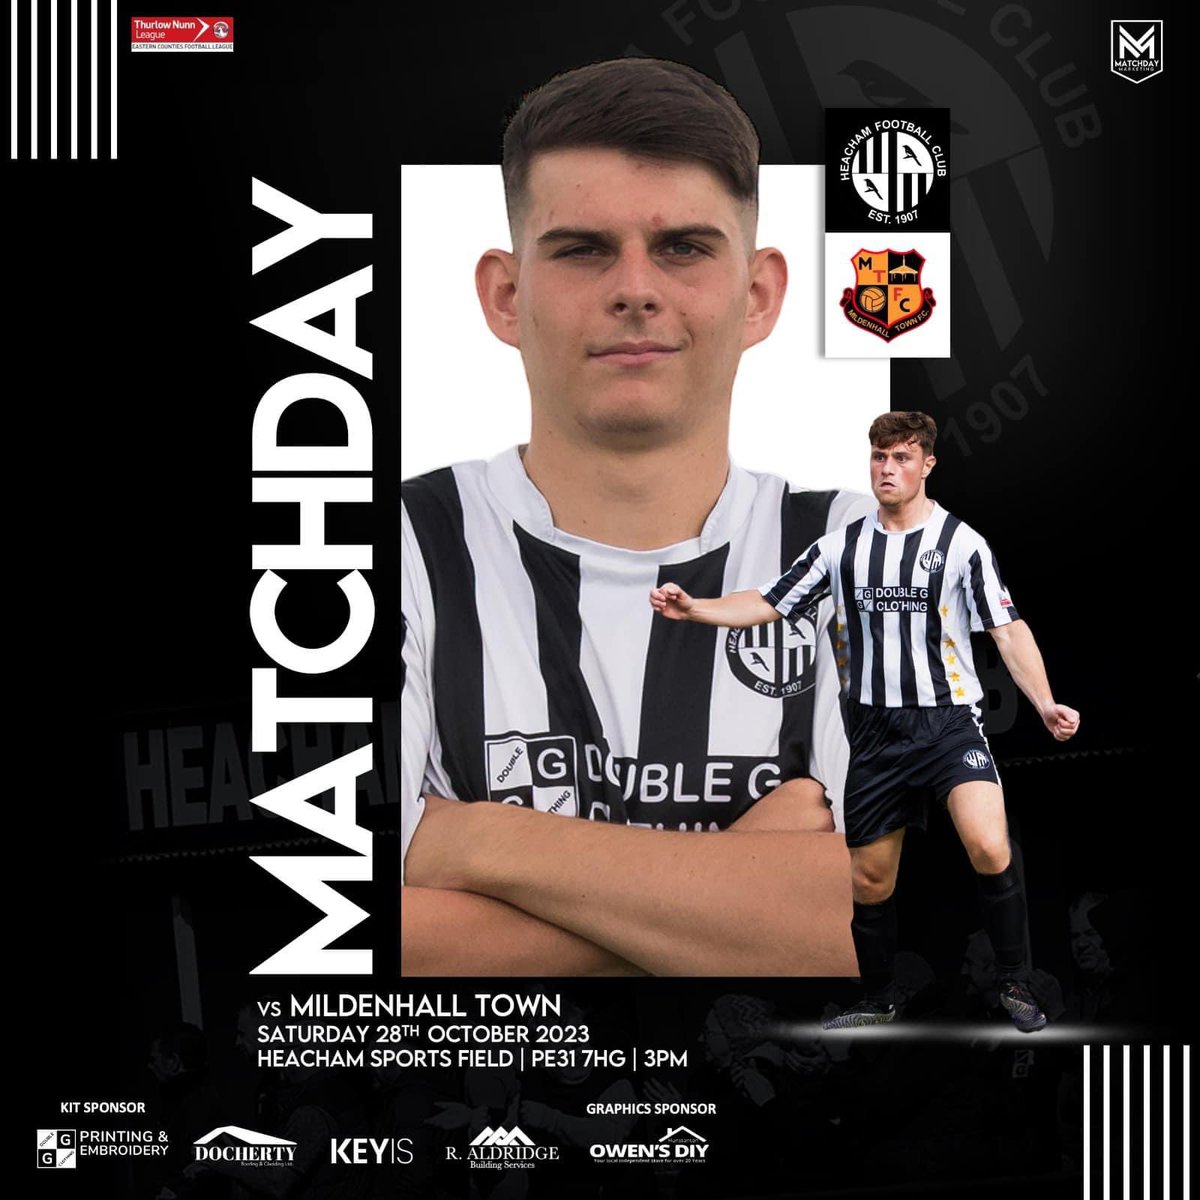 Its match day!
Card and cash excepted on the gate.
Match day programs available.
BestBites Limited Catering Van serving up hot food.
Match day staff serving hot/cold drinks/snacks.
Carol/Gordan on hand in the clubshop which includes some mega sale items.
Hope to see you there!